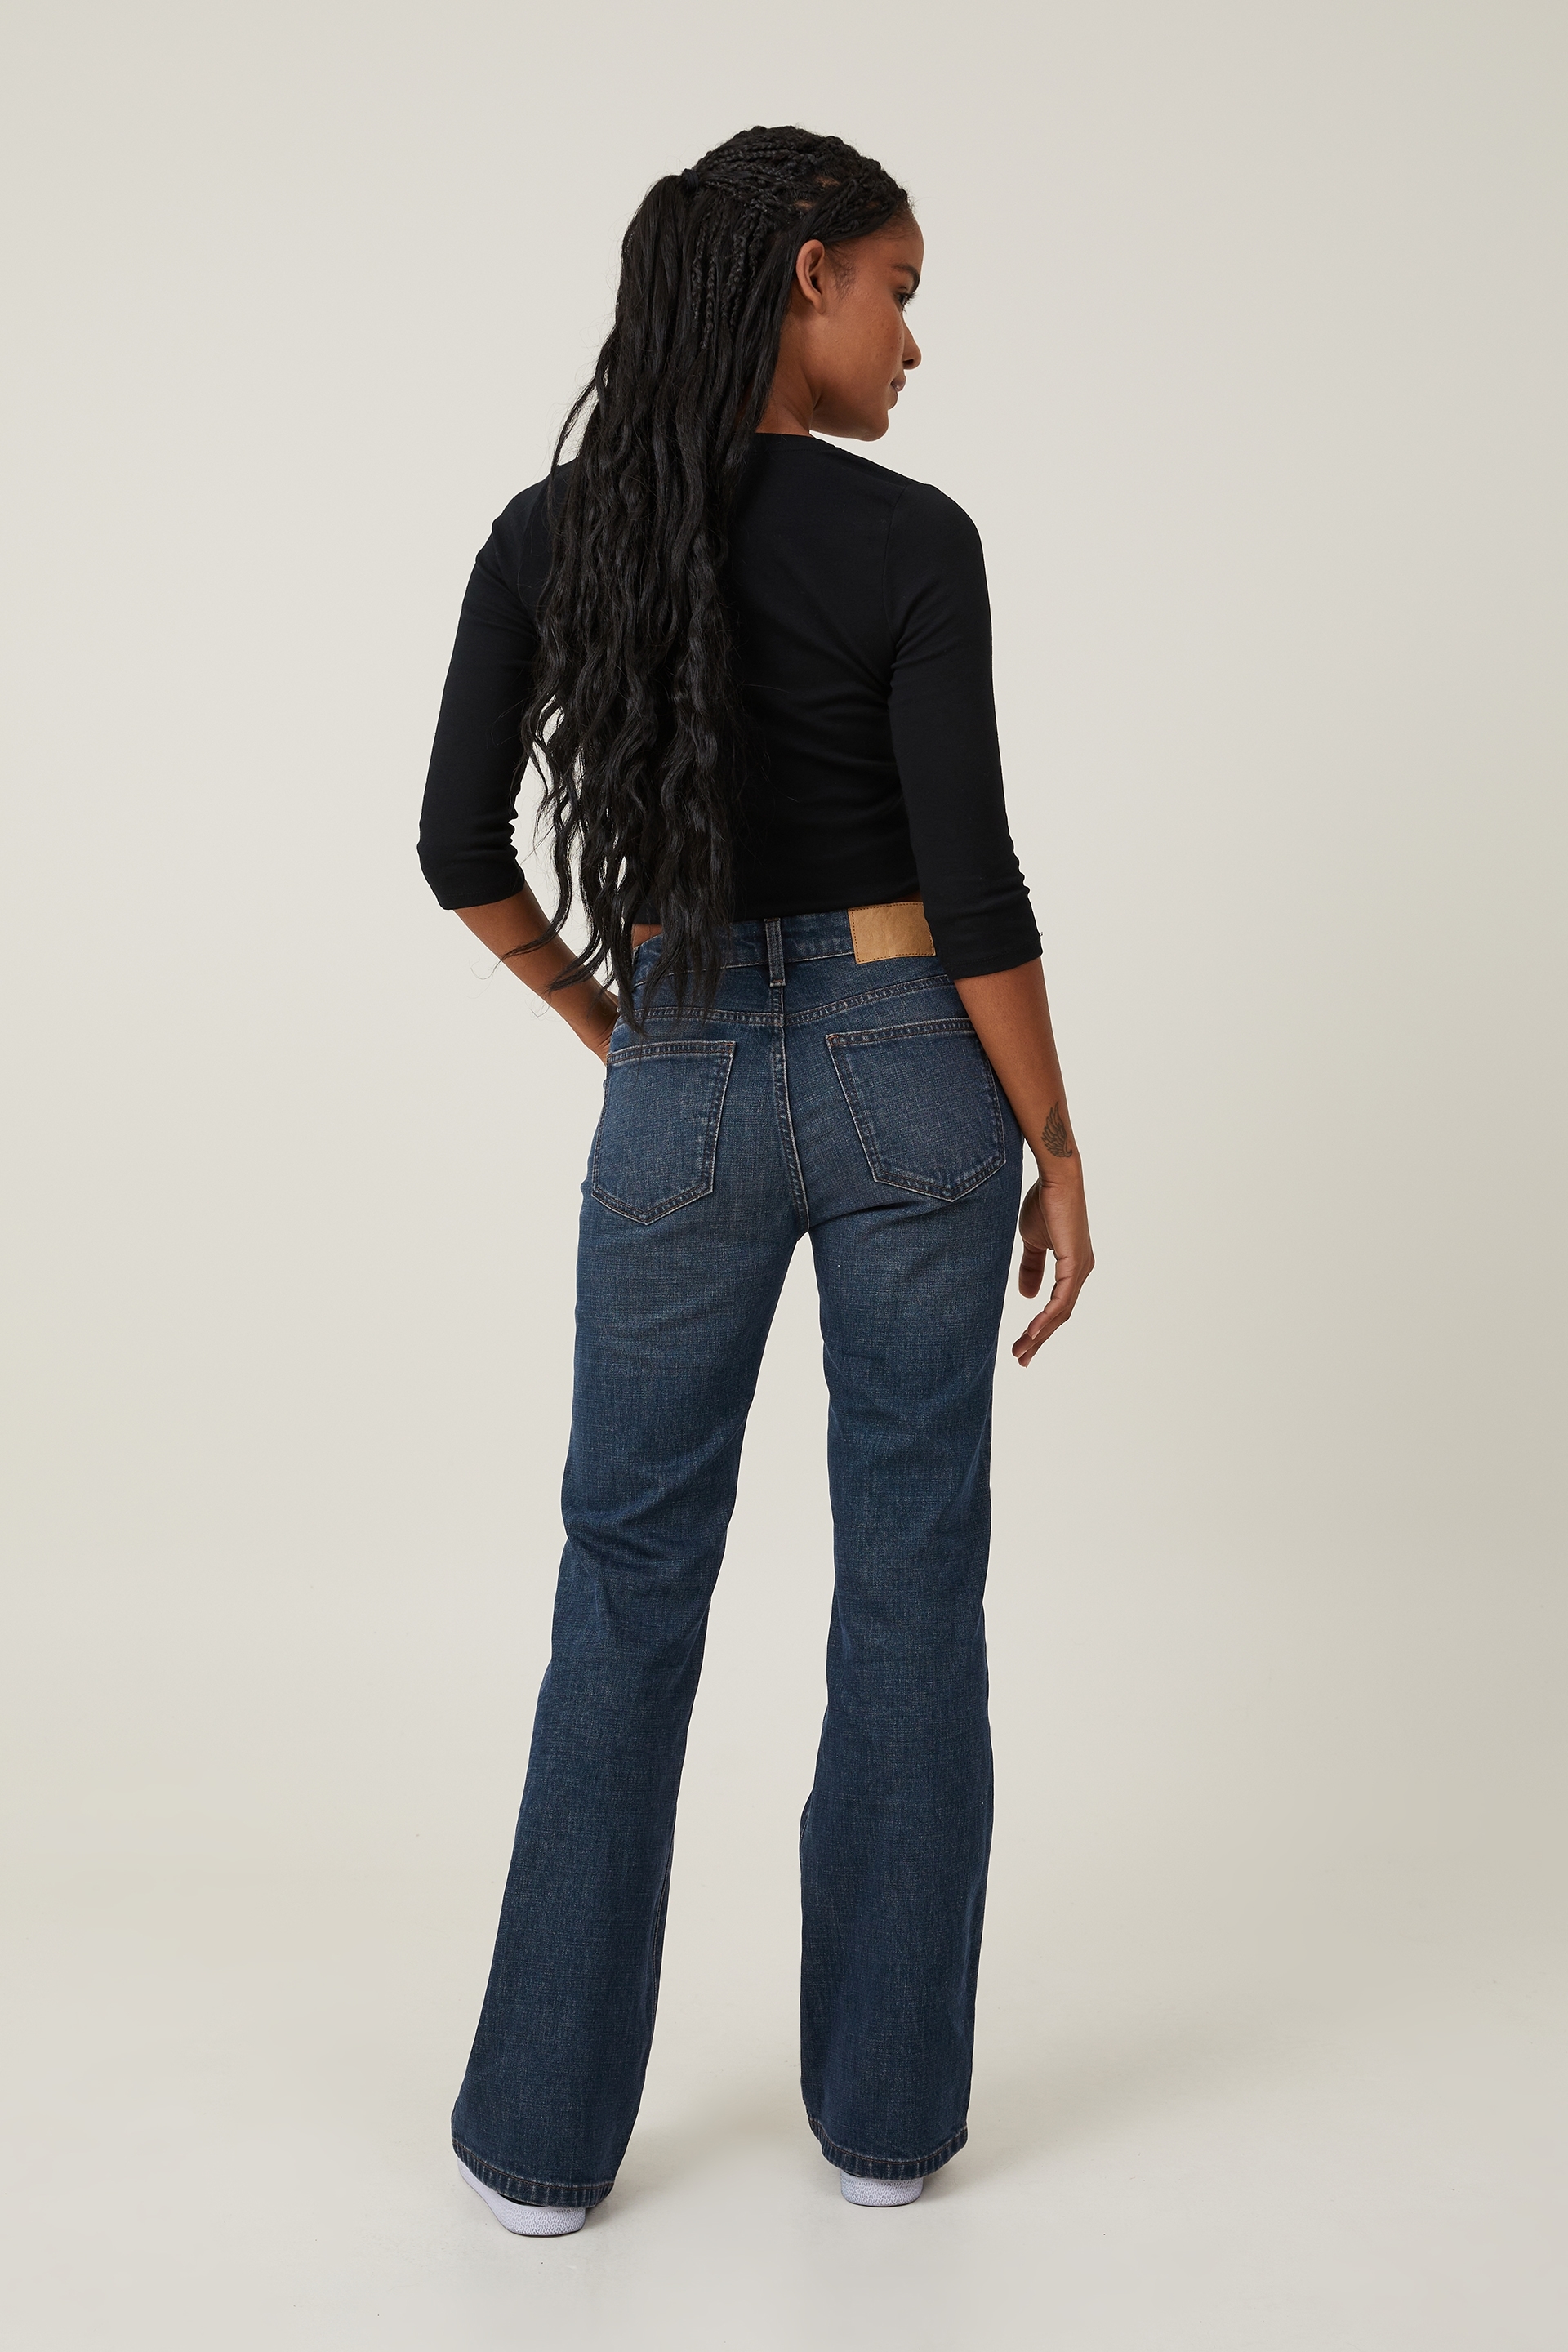 Cotton On Women's Stretch Bootleg Flare Jeans In Desert Blue,utility